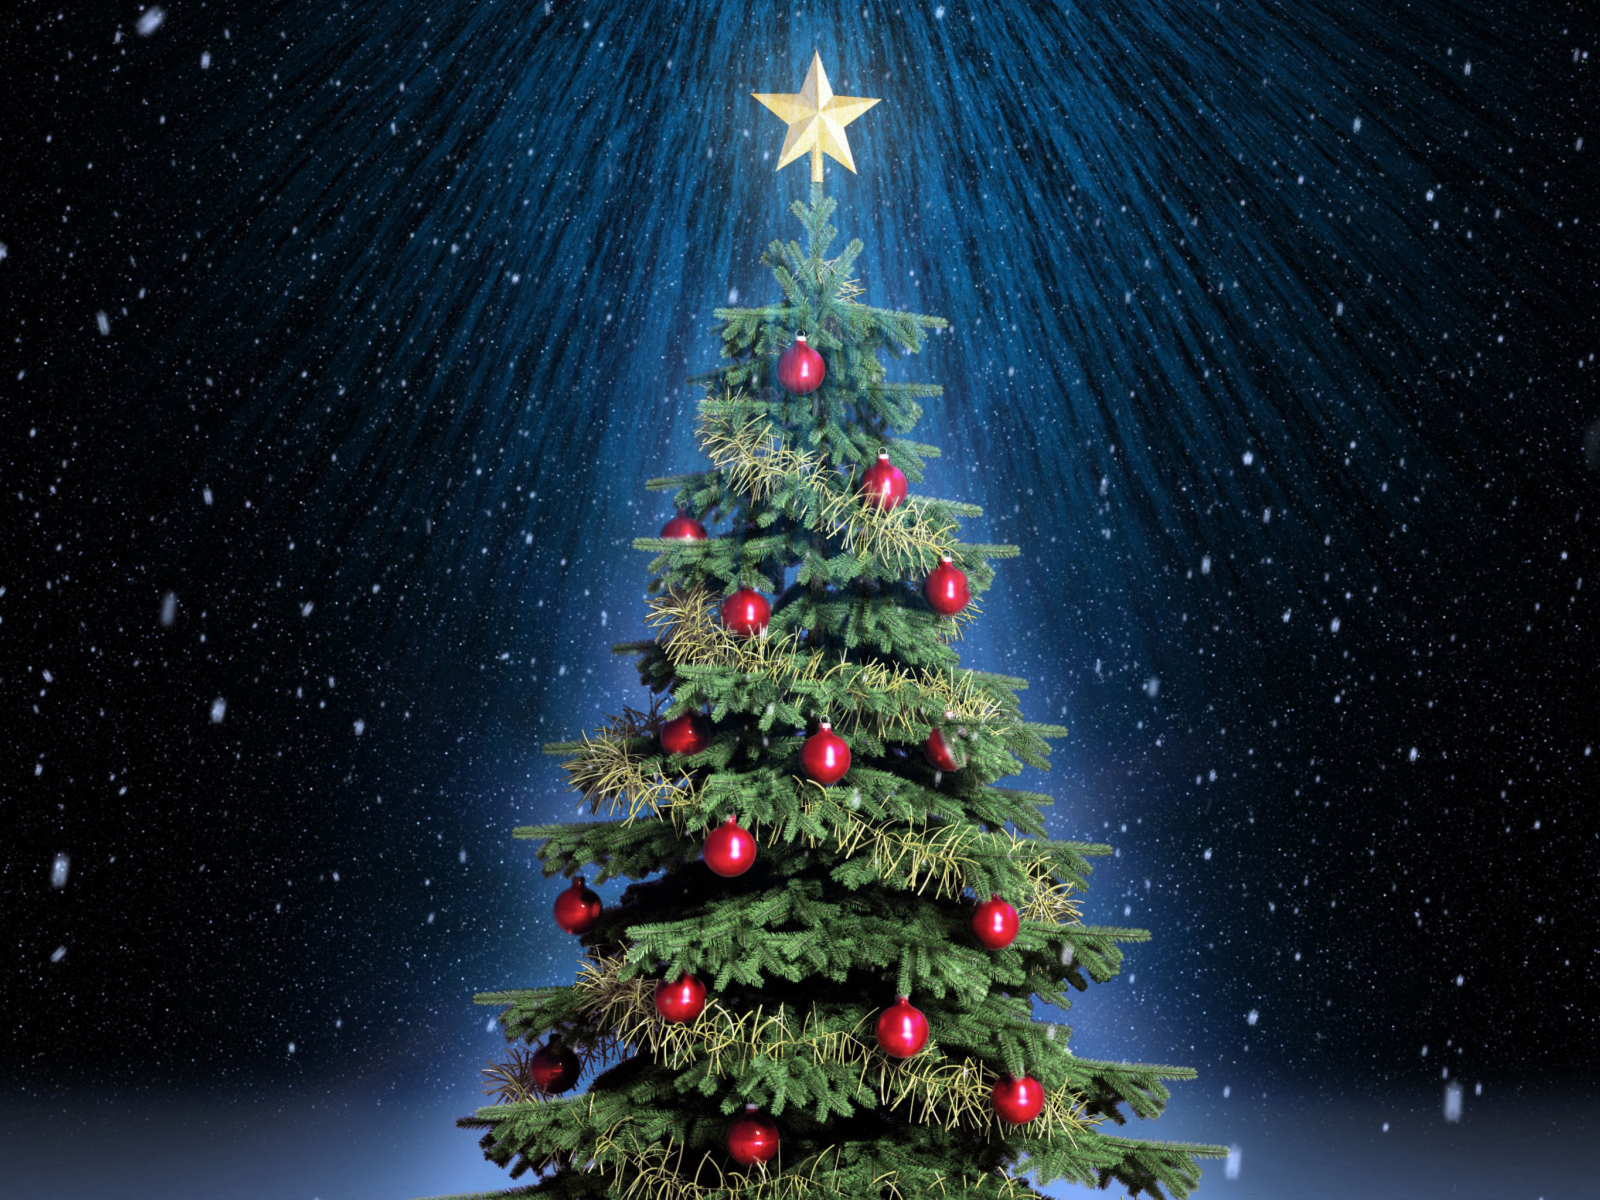 Das Classic Christmas Tree With Star On Top Wallpaper 1600x1200